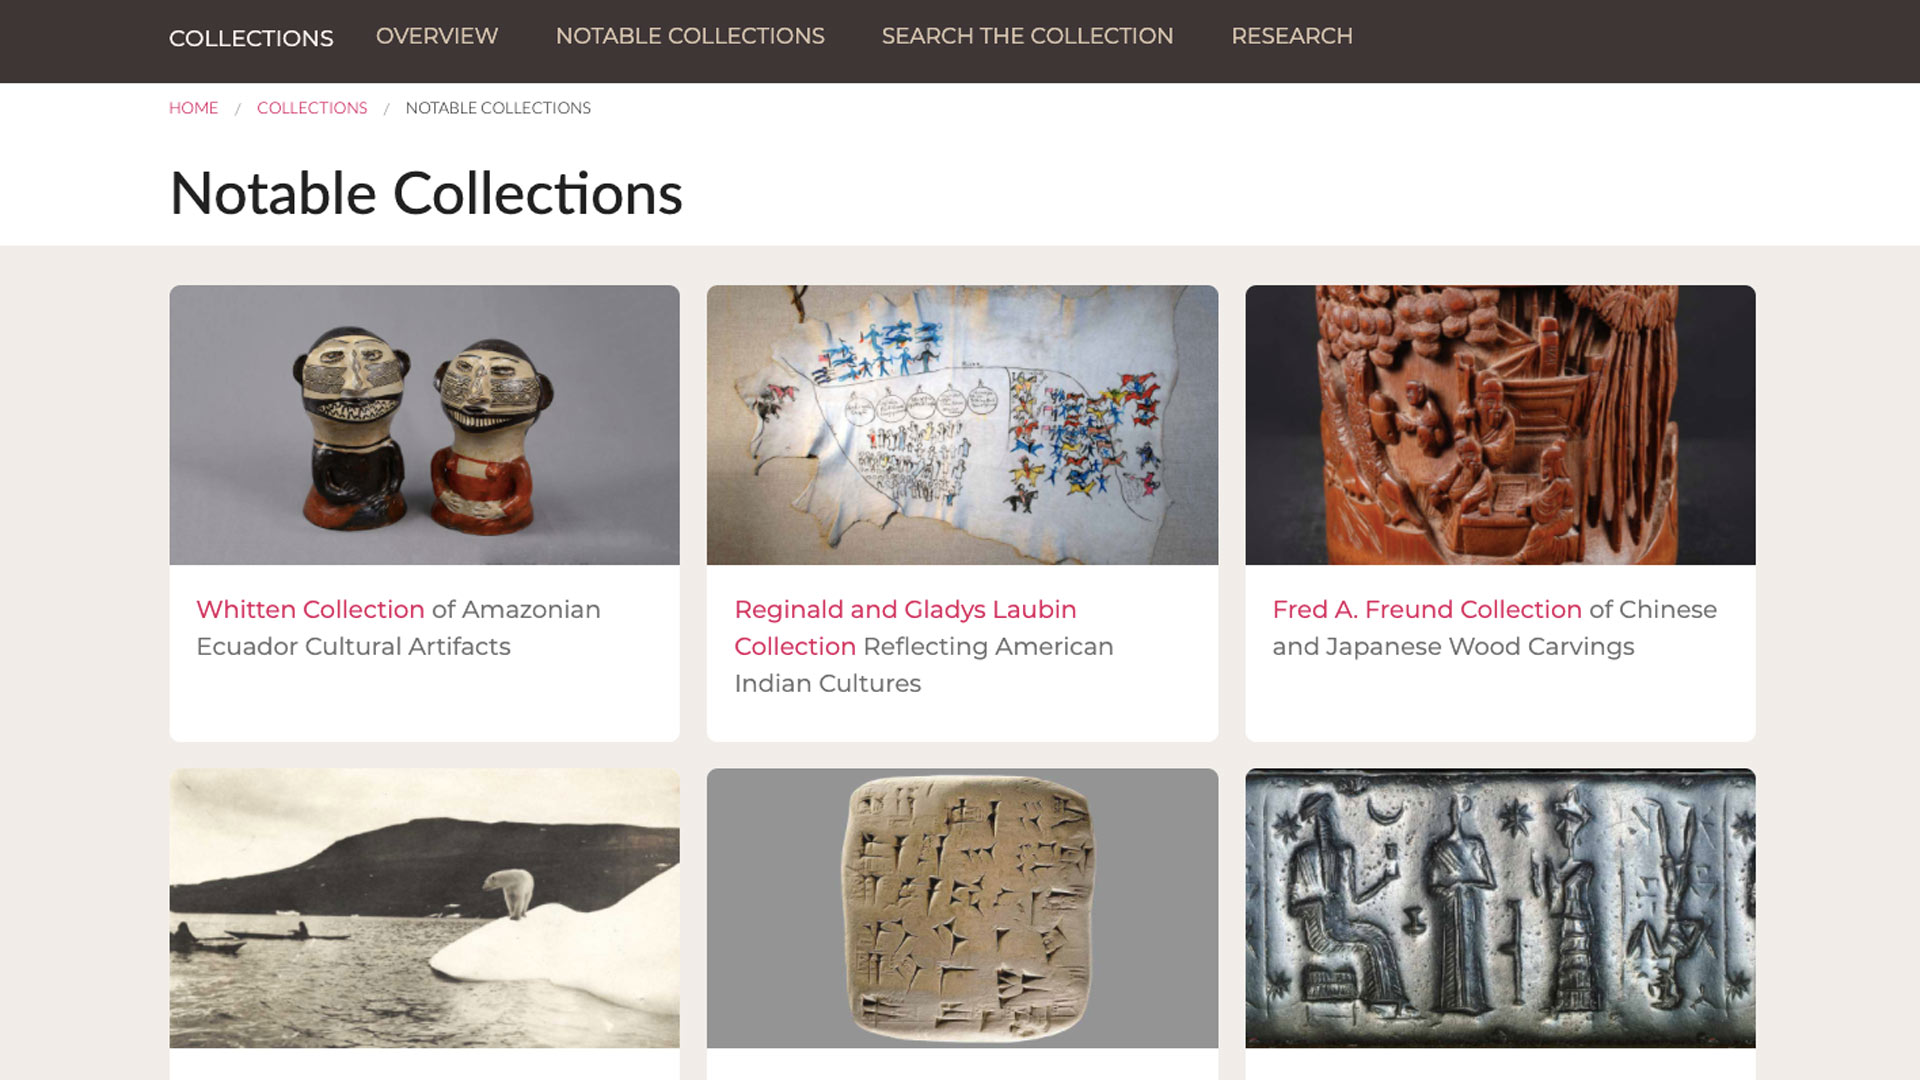 Notable collections page on website with 6 cards for collection profiles